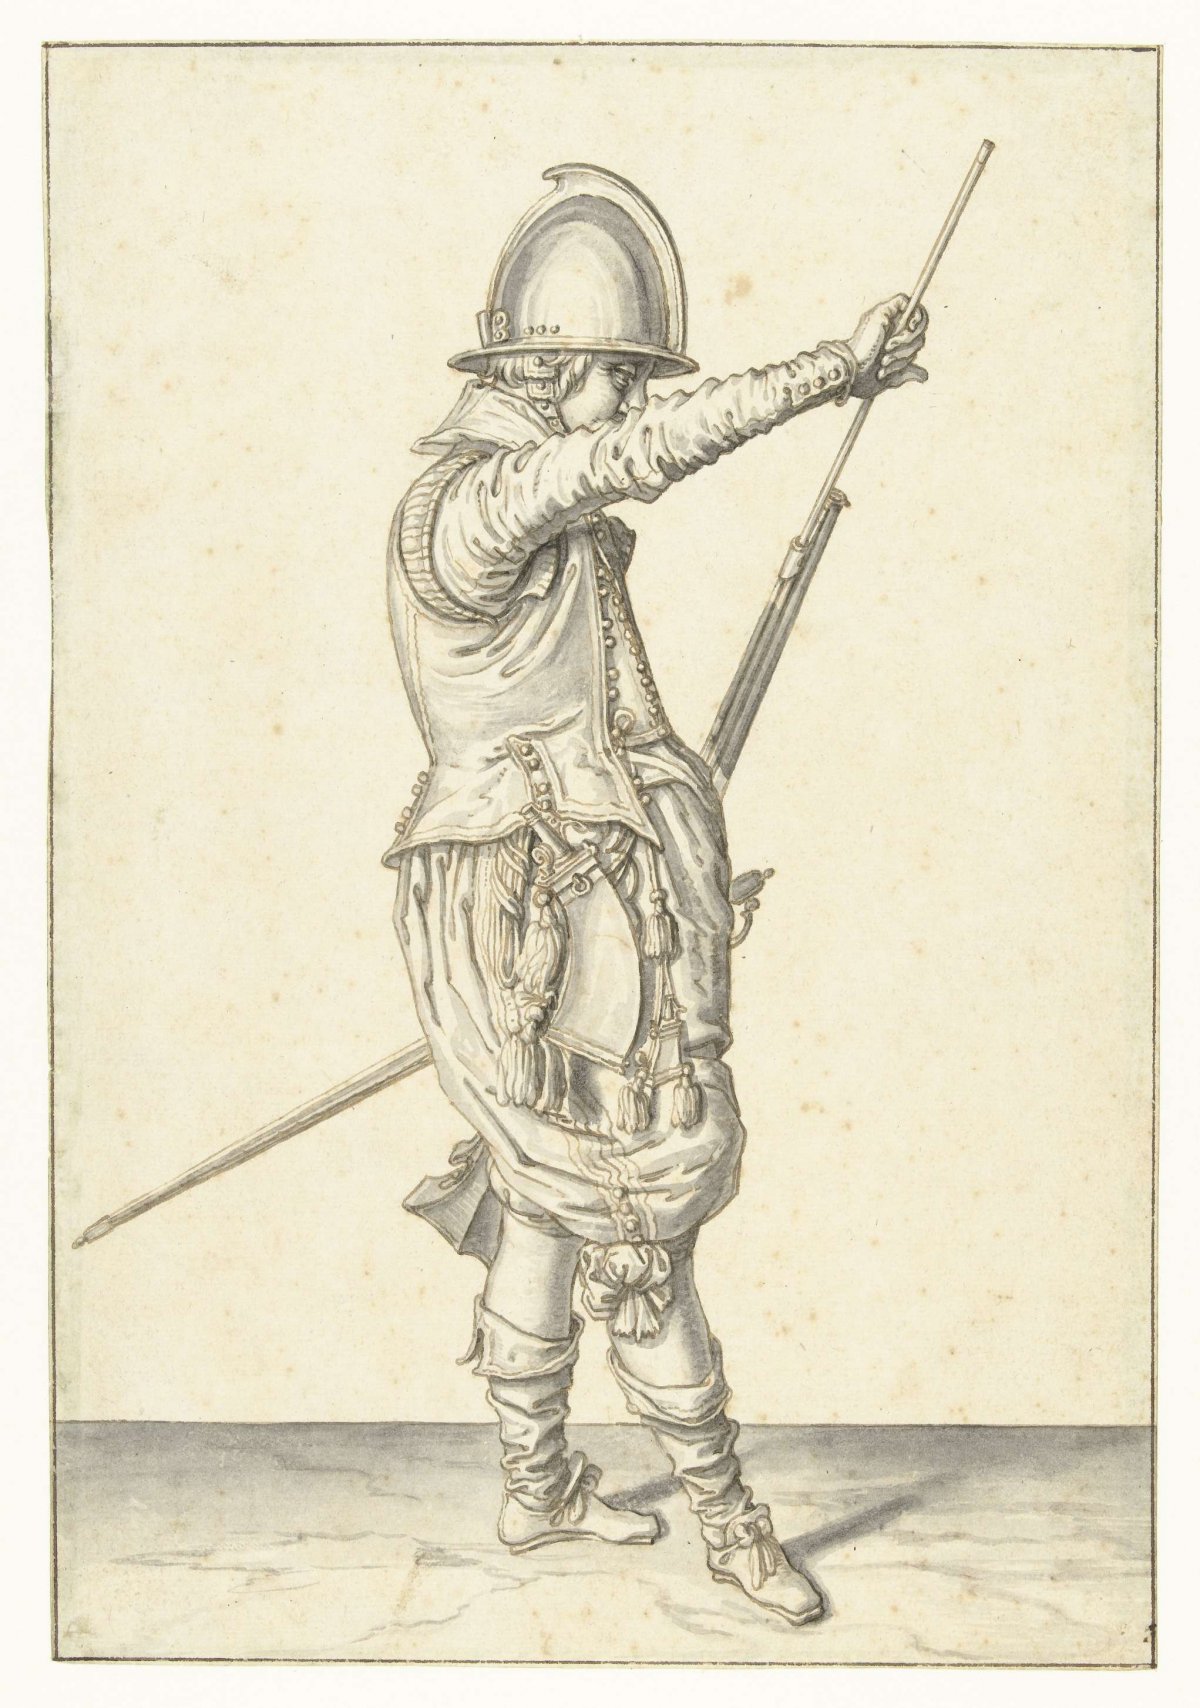 Soldier removing his ramrod from its holder under the barrel of his helm, Jacques de Gheyn (II), 1596 - 1606